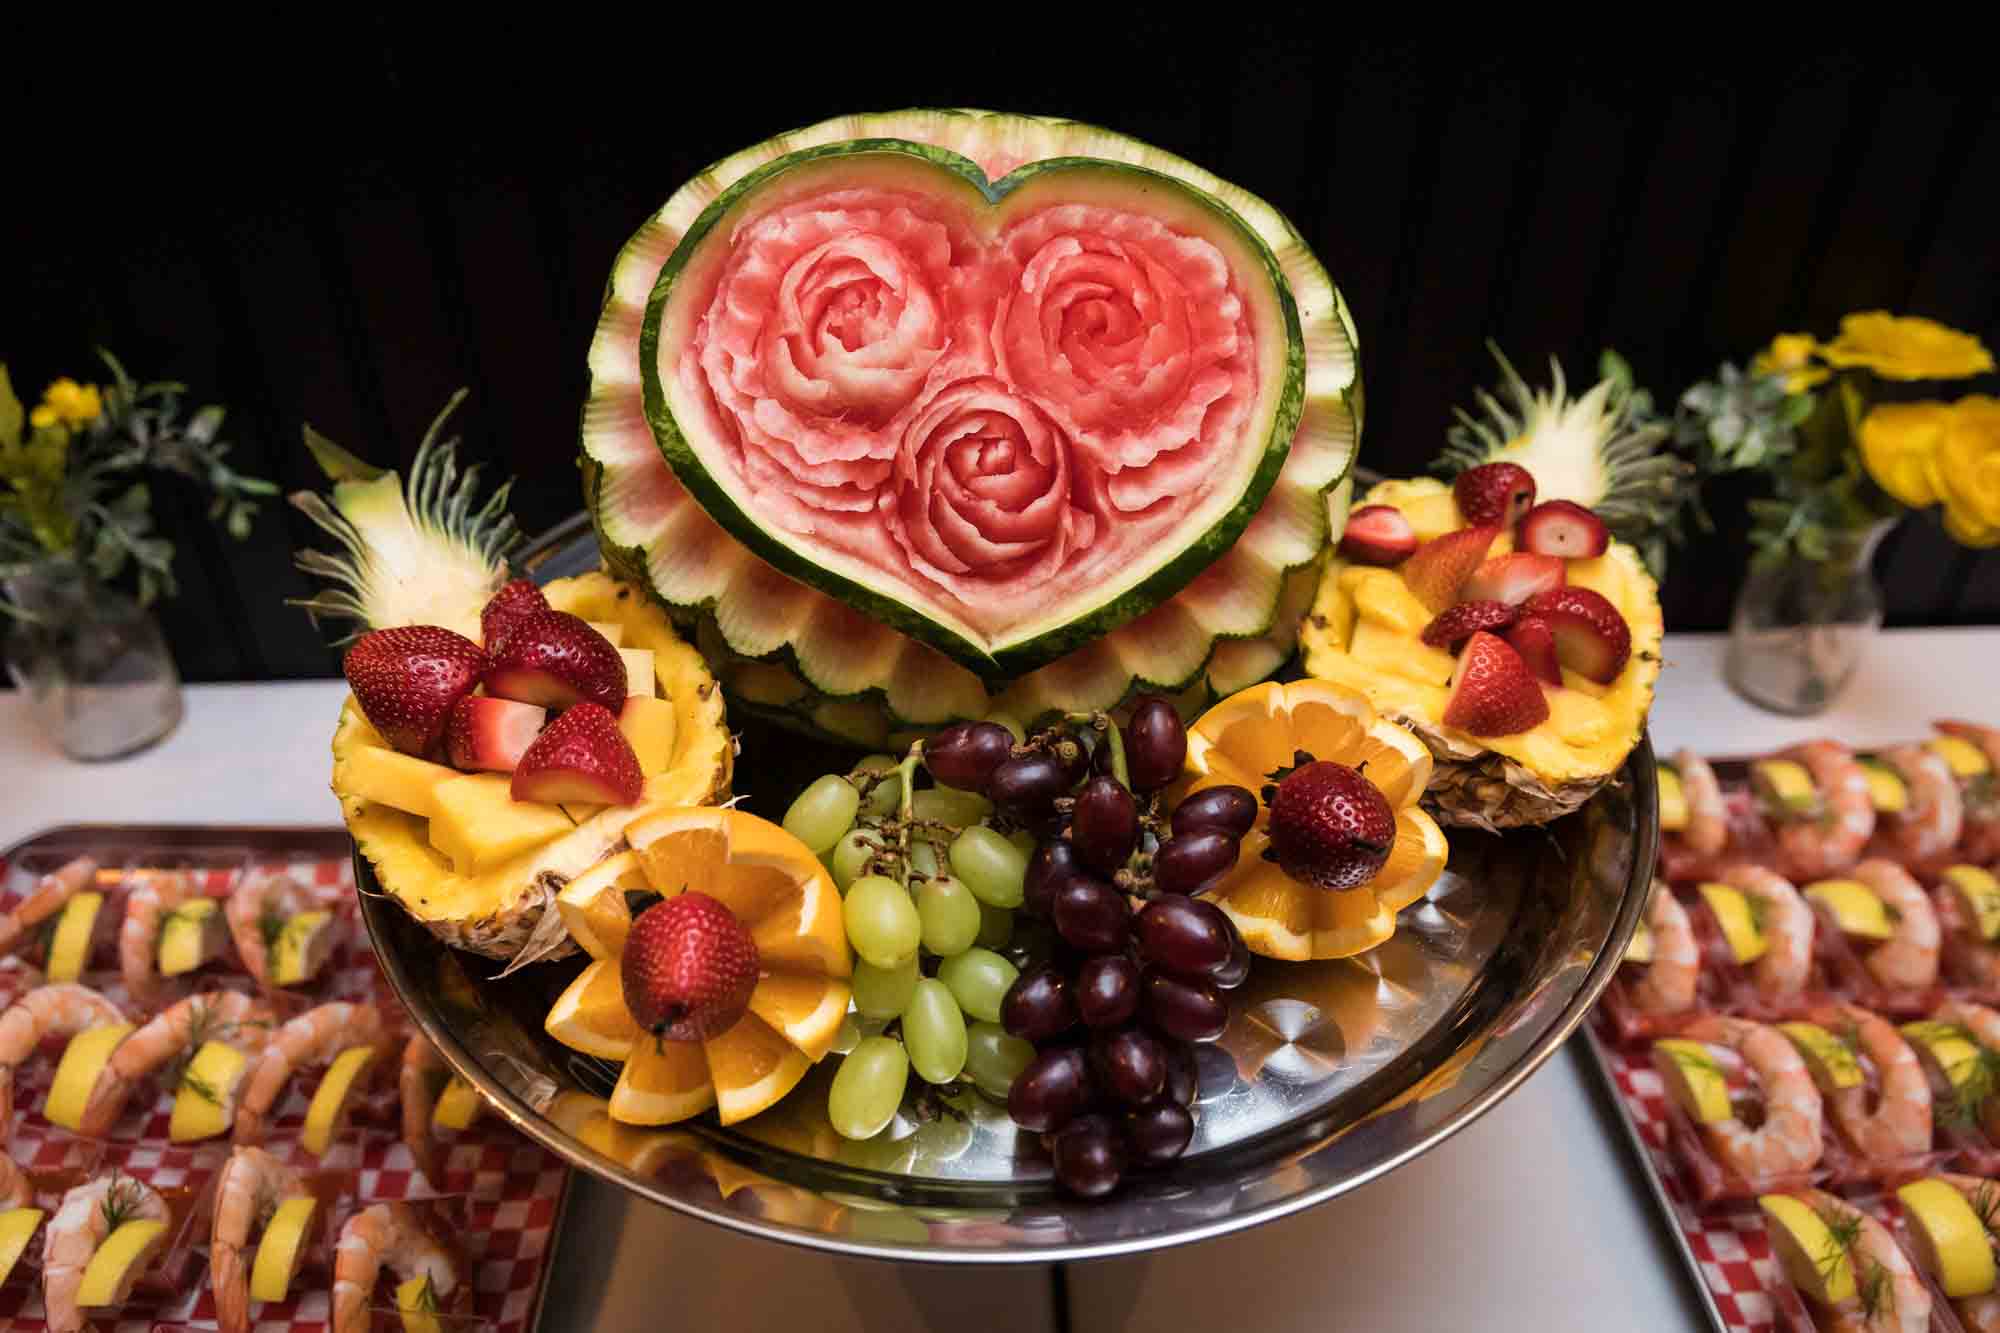 Carved fruit display featuring watermelon and grapes